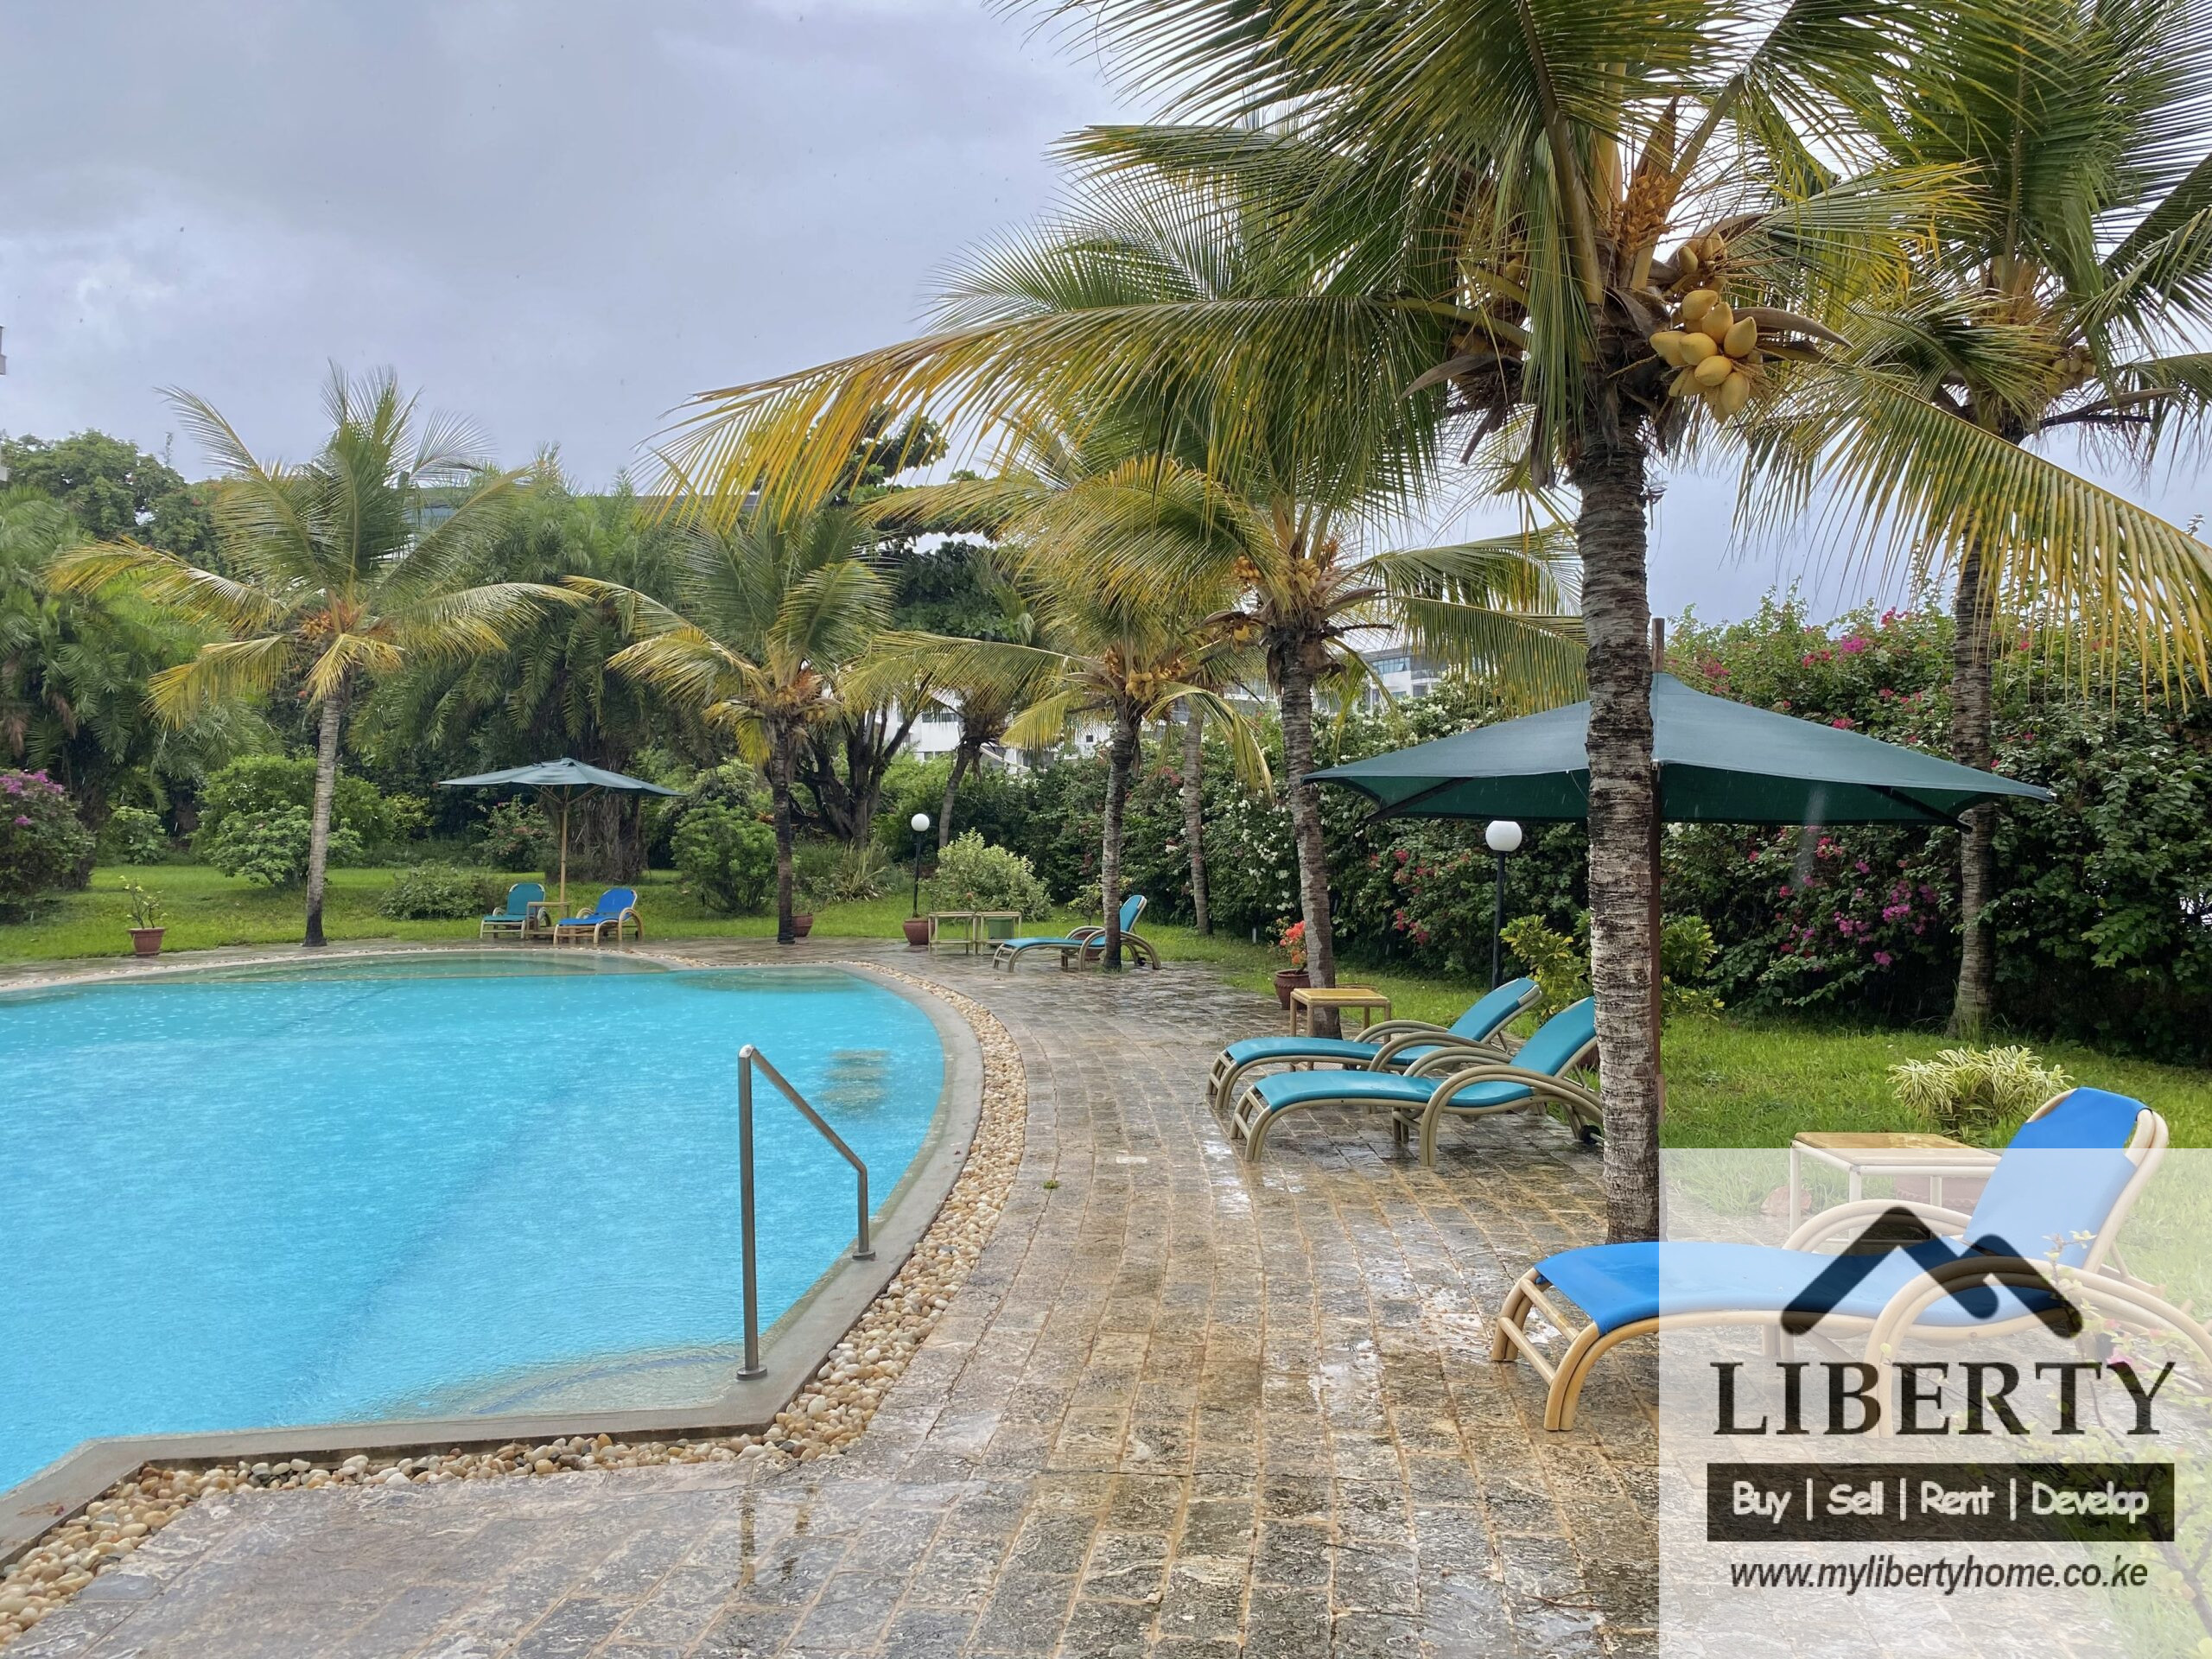 A Deluxe Beachfront 3 Bedroom Furnished Apartment In Mombasa-Nyali For Rent-250K- Ref-784